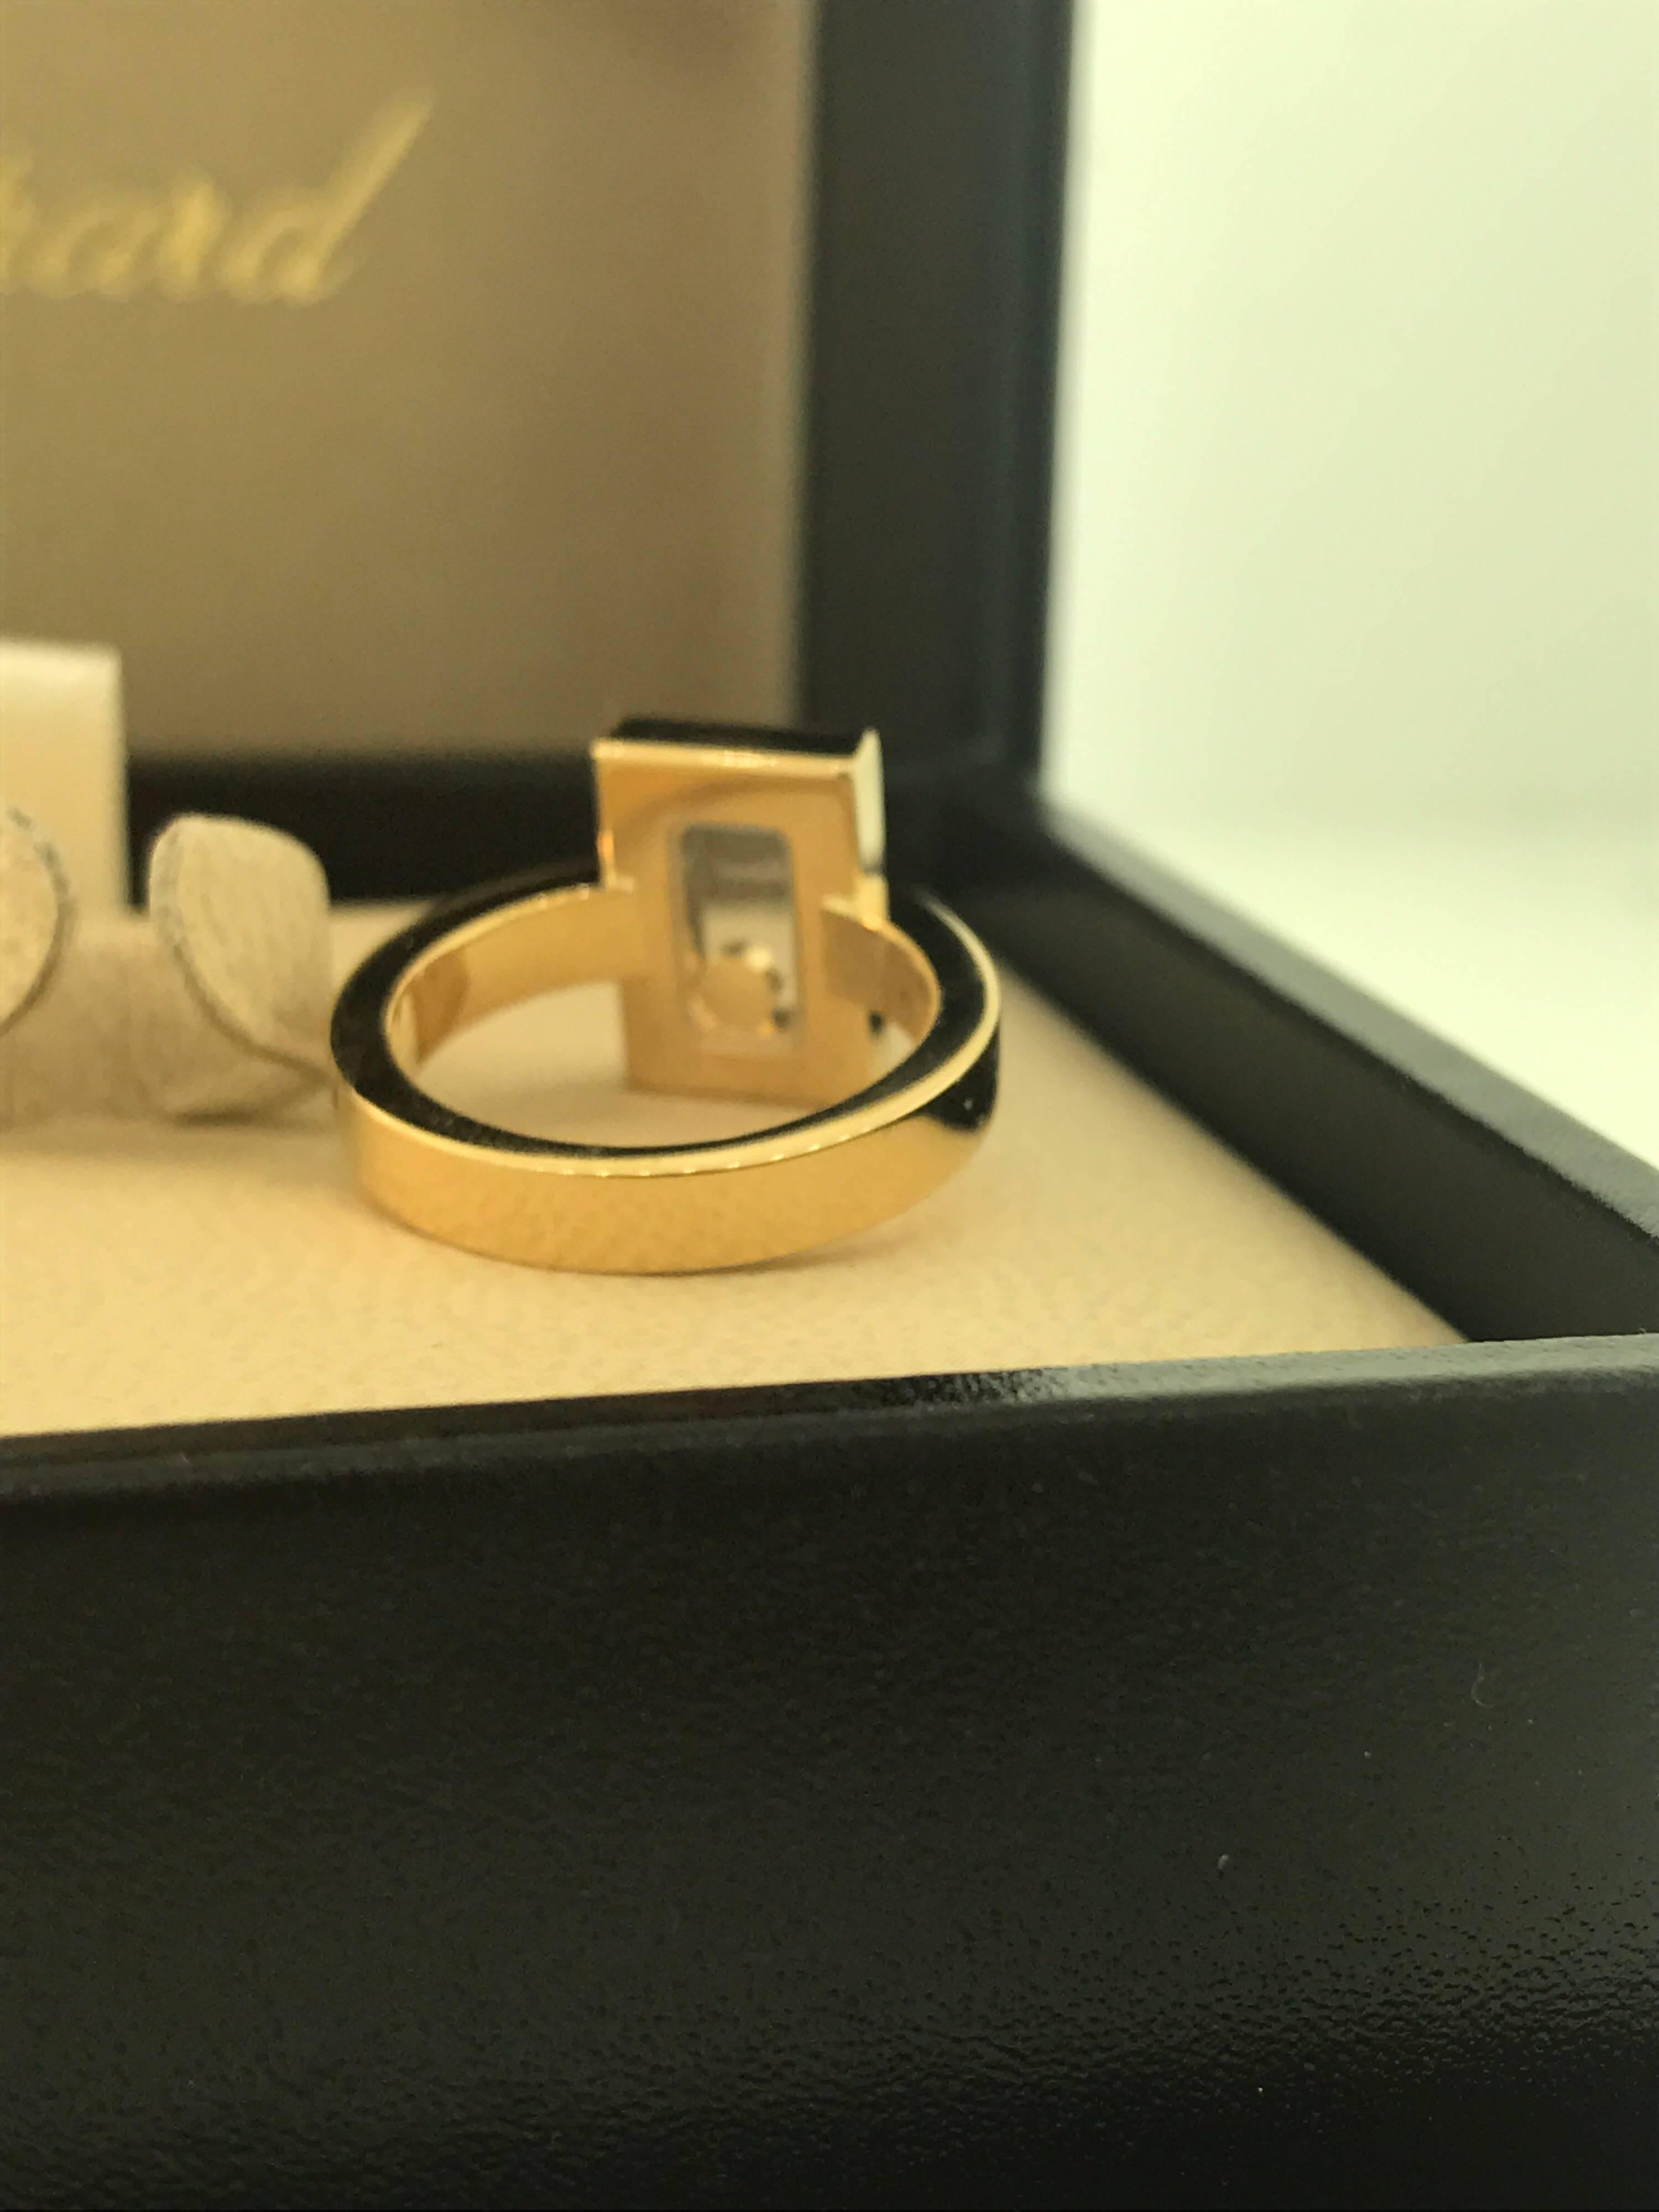 Chopard Happy Diamonds Rectangular Shape Ring

Model Number: 82/6729-0107

100% Authentic

Brand New

Comes with original Chopard box, certificate of authenticity and warranty, and jewels manual

18 Karat Yellow Gold (8.20gr)

1 Floating Diamond